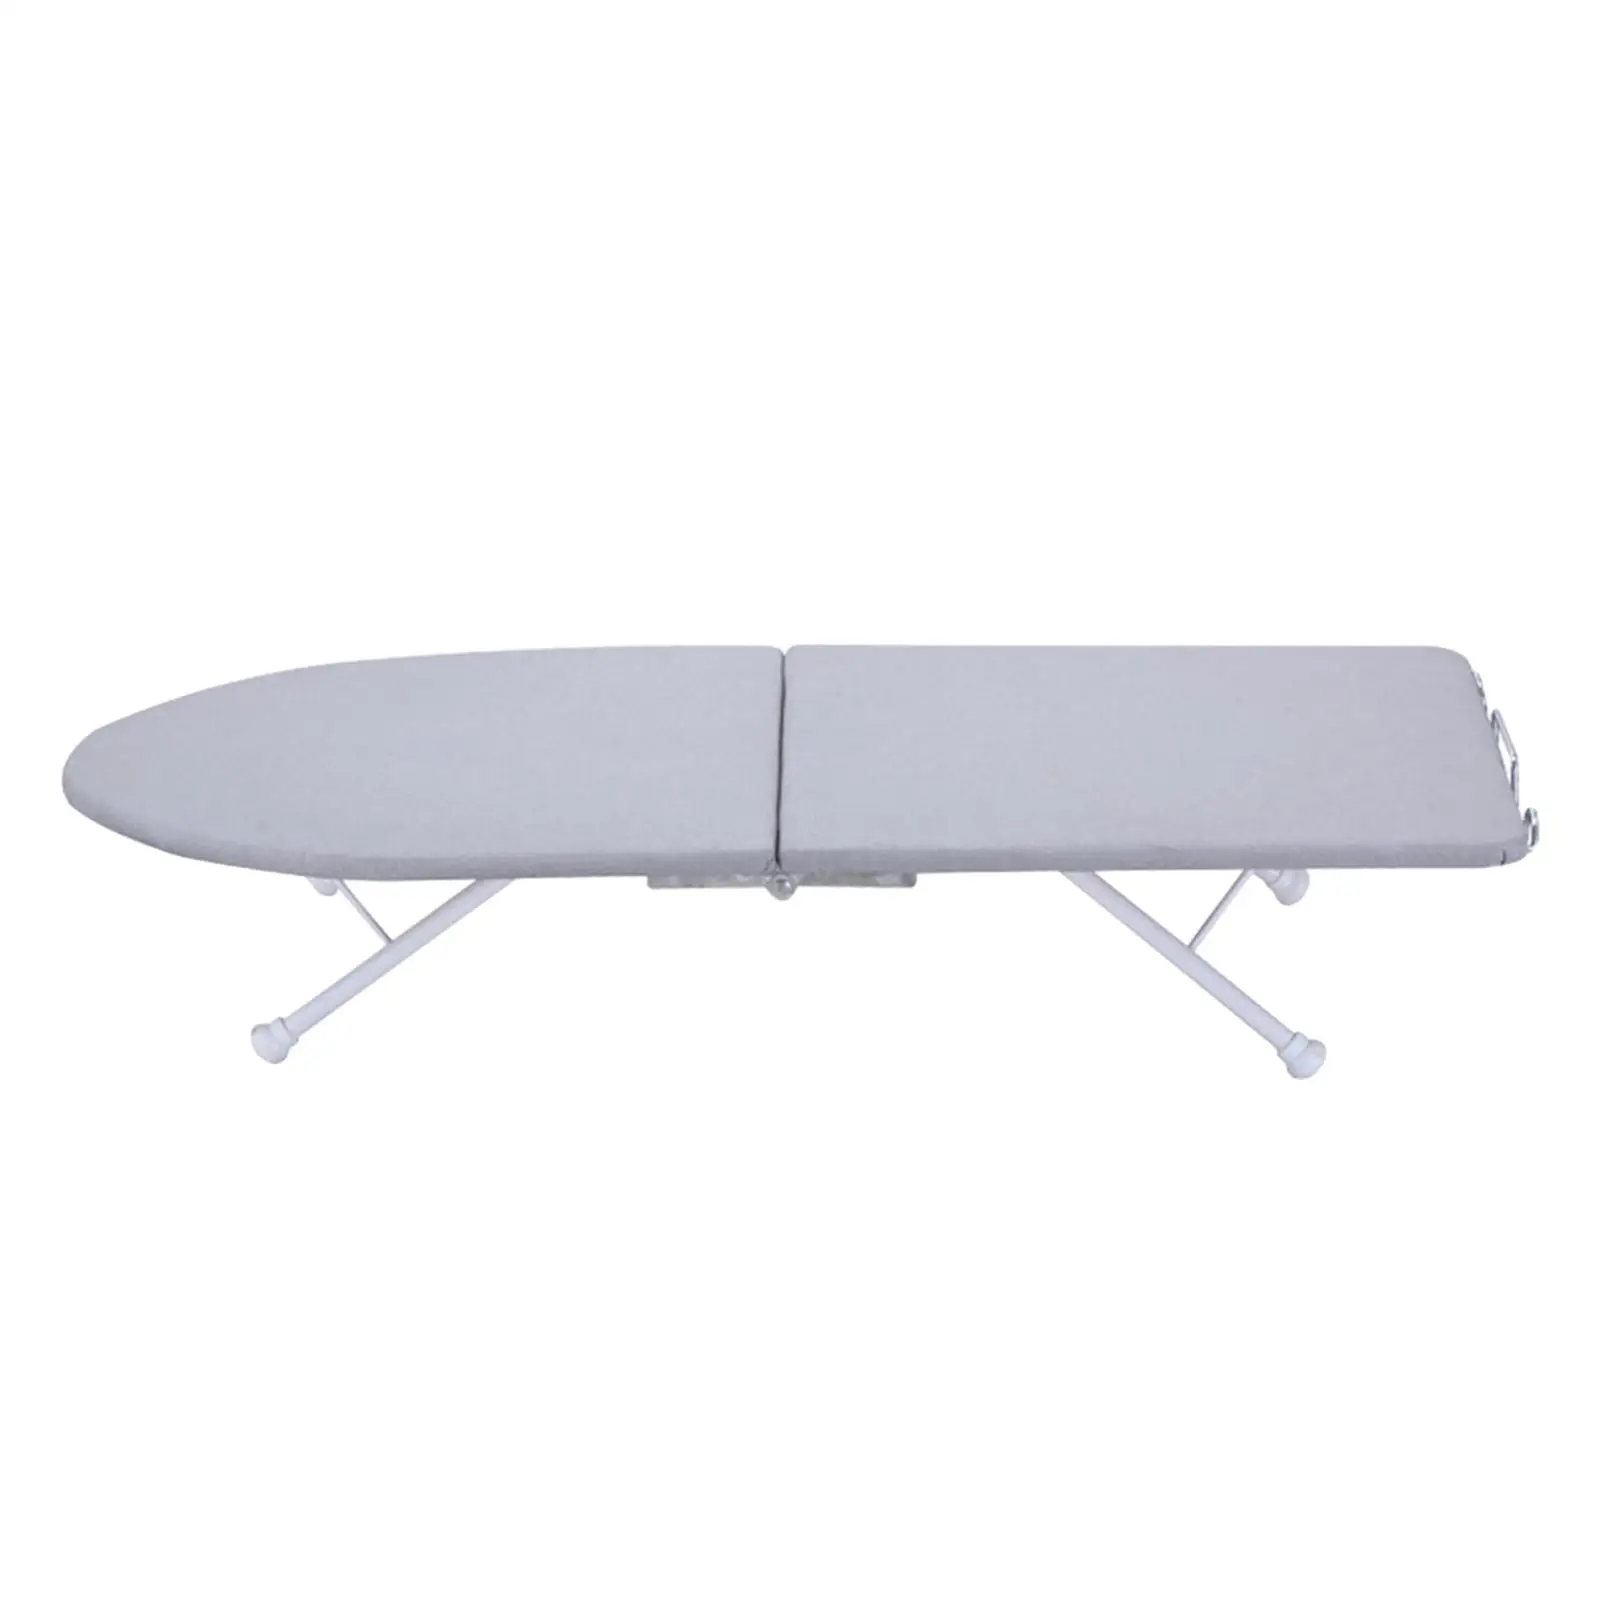 Tabletop Ironing Board Heavy Duty Space Saving Mini Ironing Board with Iron Rest for Apartment, Dorm, Home, Craft Room, Travel